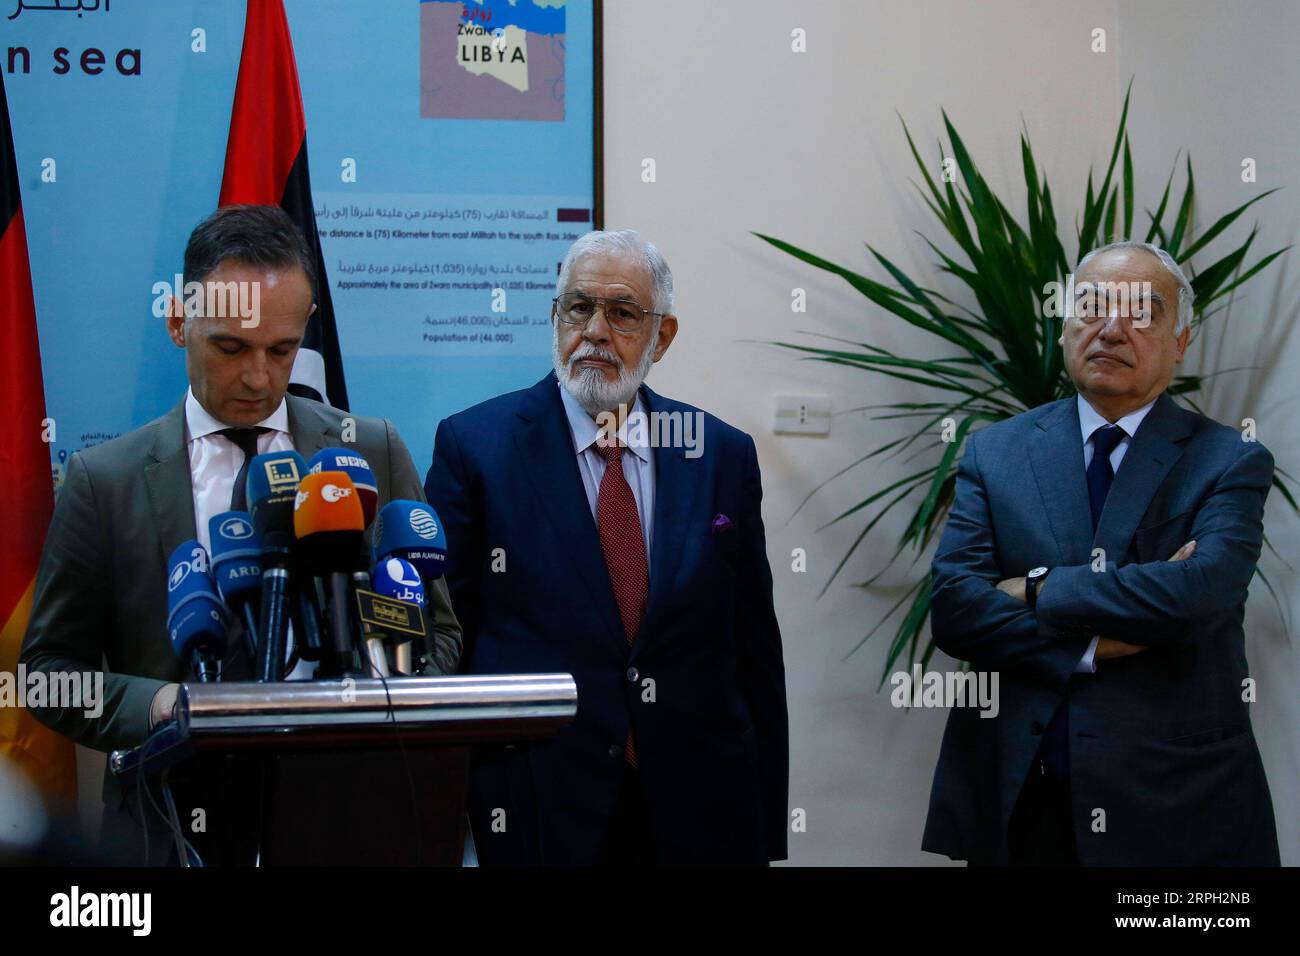 191027 -- ZUWARA LIBYA, Oct. 27, 2019 Xinhua -- German Foreign Minister Heiko Maas L speaks at a press conference in Zuwara, Libya, Oct. 27, 2019. German Foreign Minister Heiko Maas on Sunday stressed Germany s support for the efforts of the UN Special Envoy to Libya Ghassan Salame that aim to end the current Libyan crisis. Photo by Hamza Turkia/Xinhua LIBYA-ZUWARA-UN ENVOY-GERMAN FM-VISIT PUBLICATIONxNOTxINxCHN Stock Photo